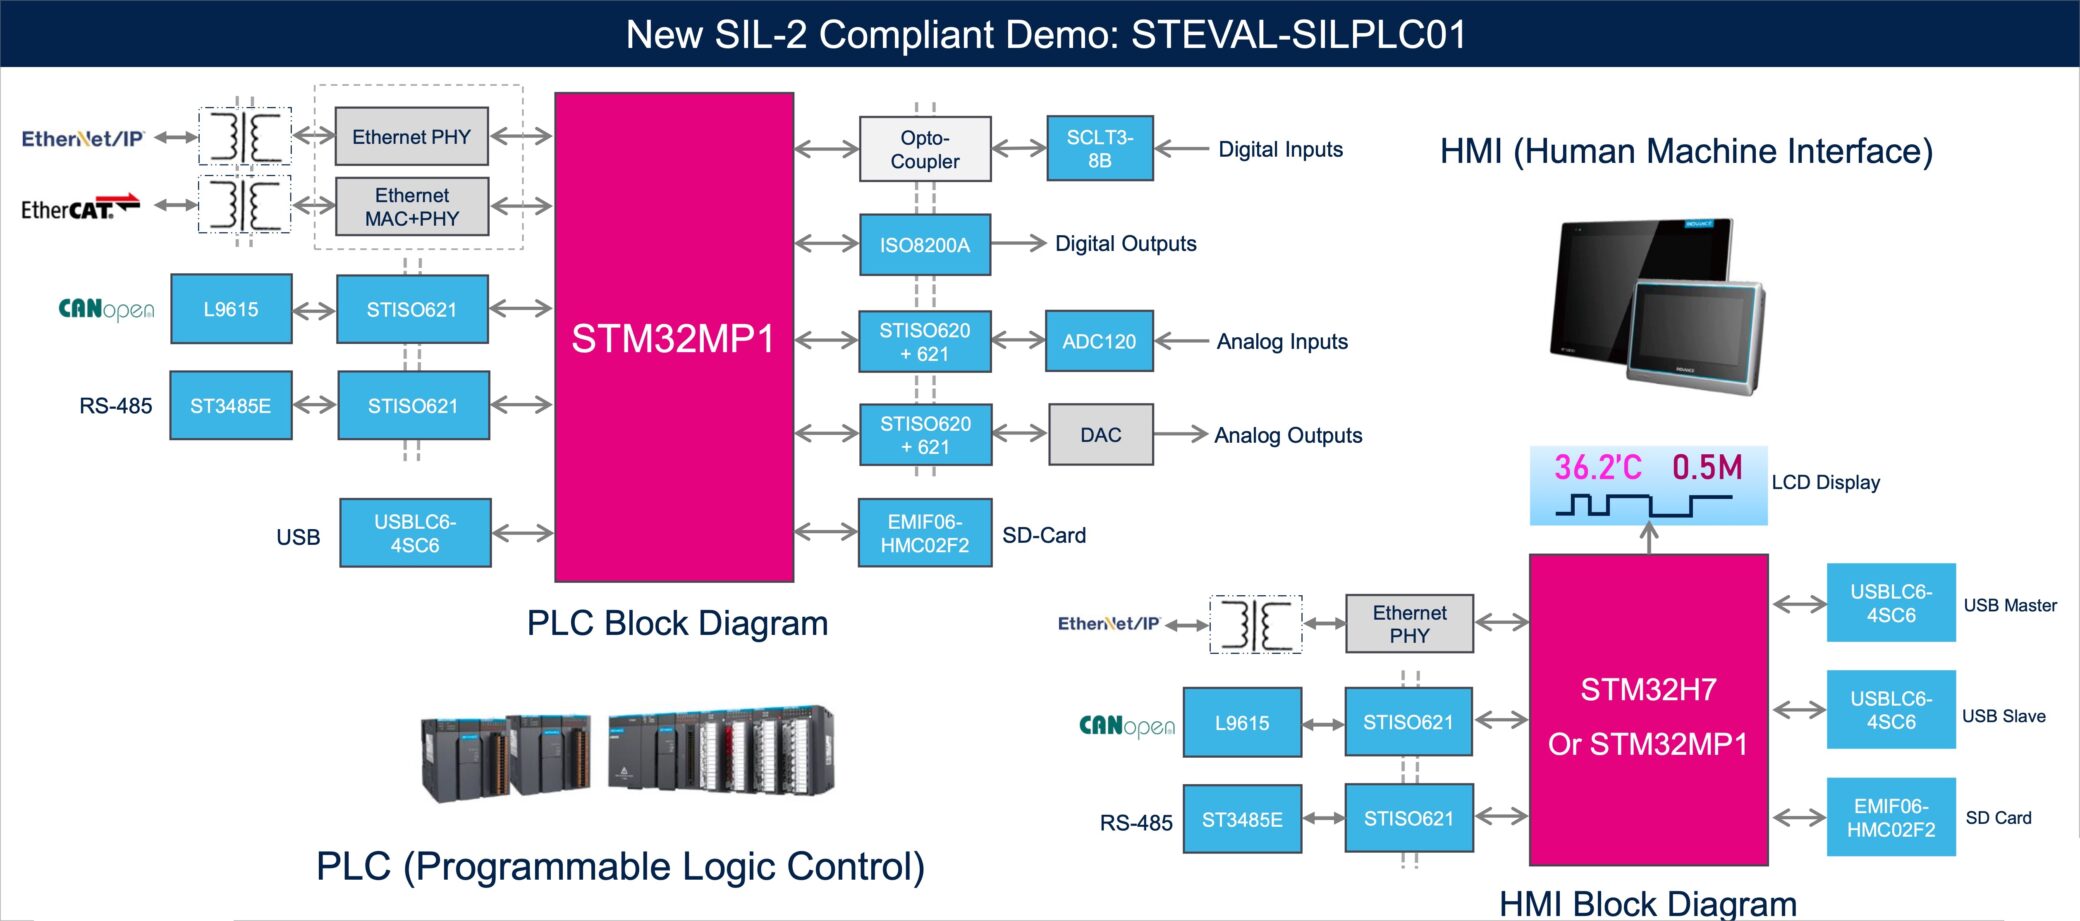 The STEVAL-SILPLC01